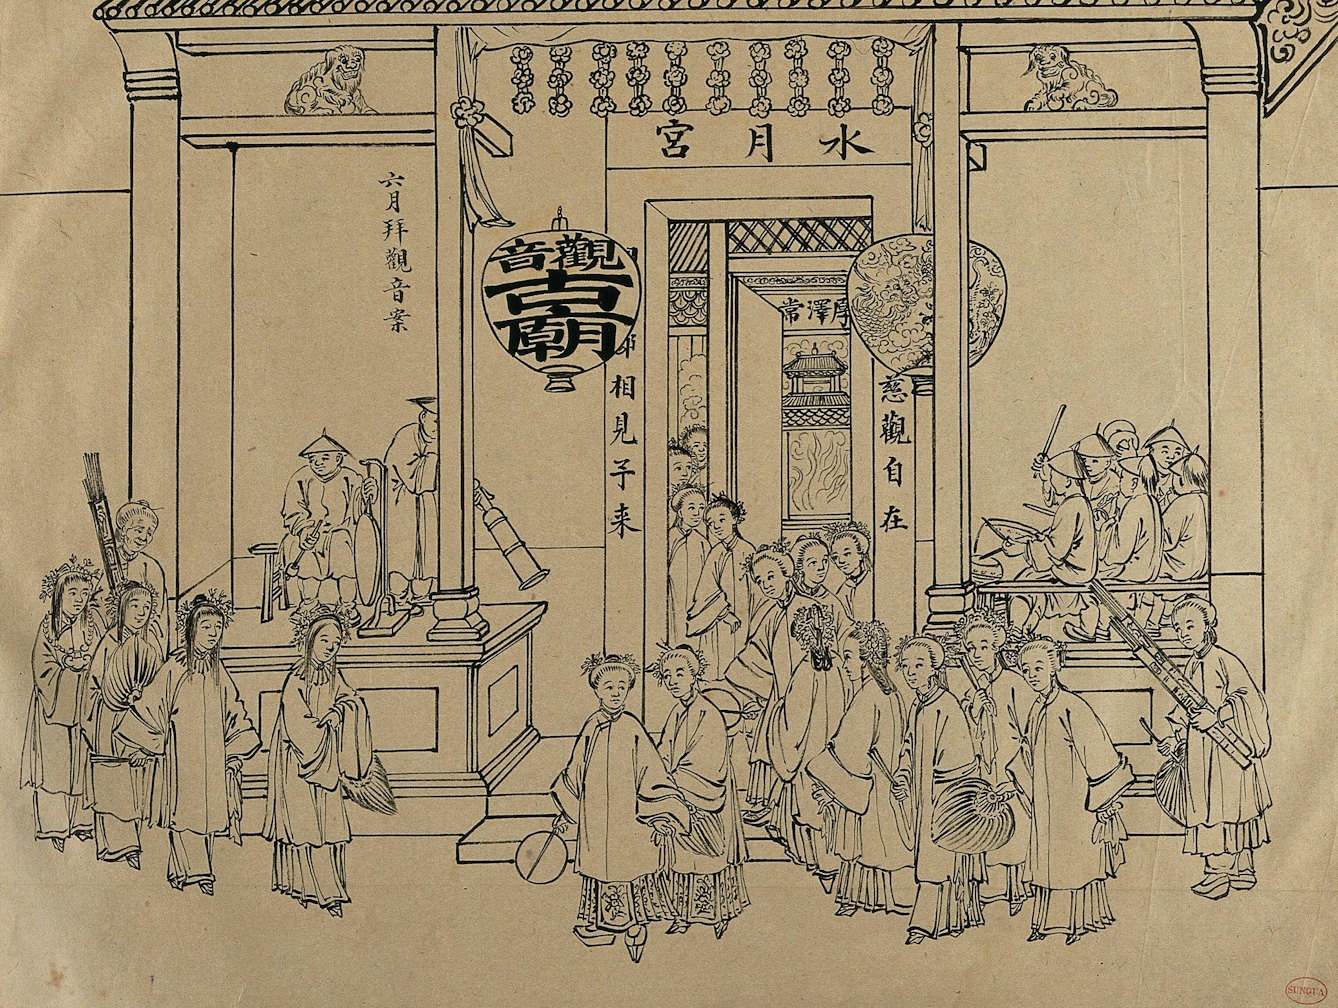 19th century brush drawing of a Chinese ceremony. The drawing shows a large group of people dressed in ceremonial clothing, gathered outside a building adorned with lanterns and inscriptions in Chinese script. Several women on the left of the drawing are wearing cloud collars. 